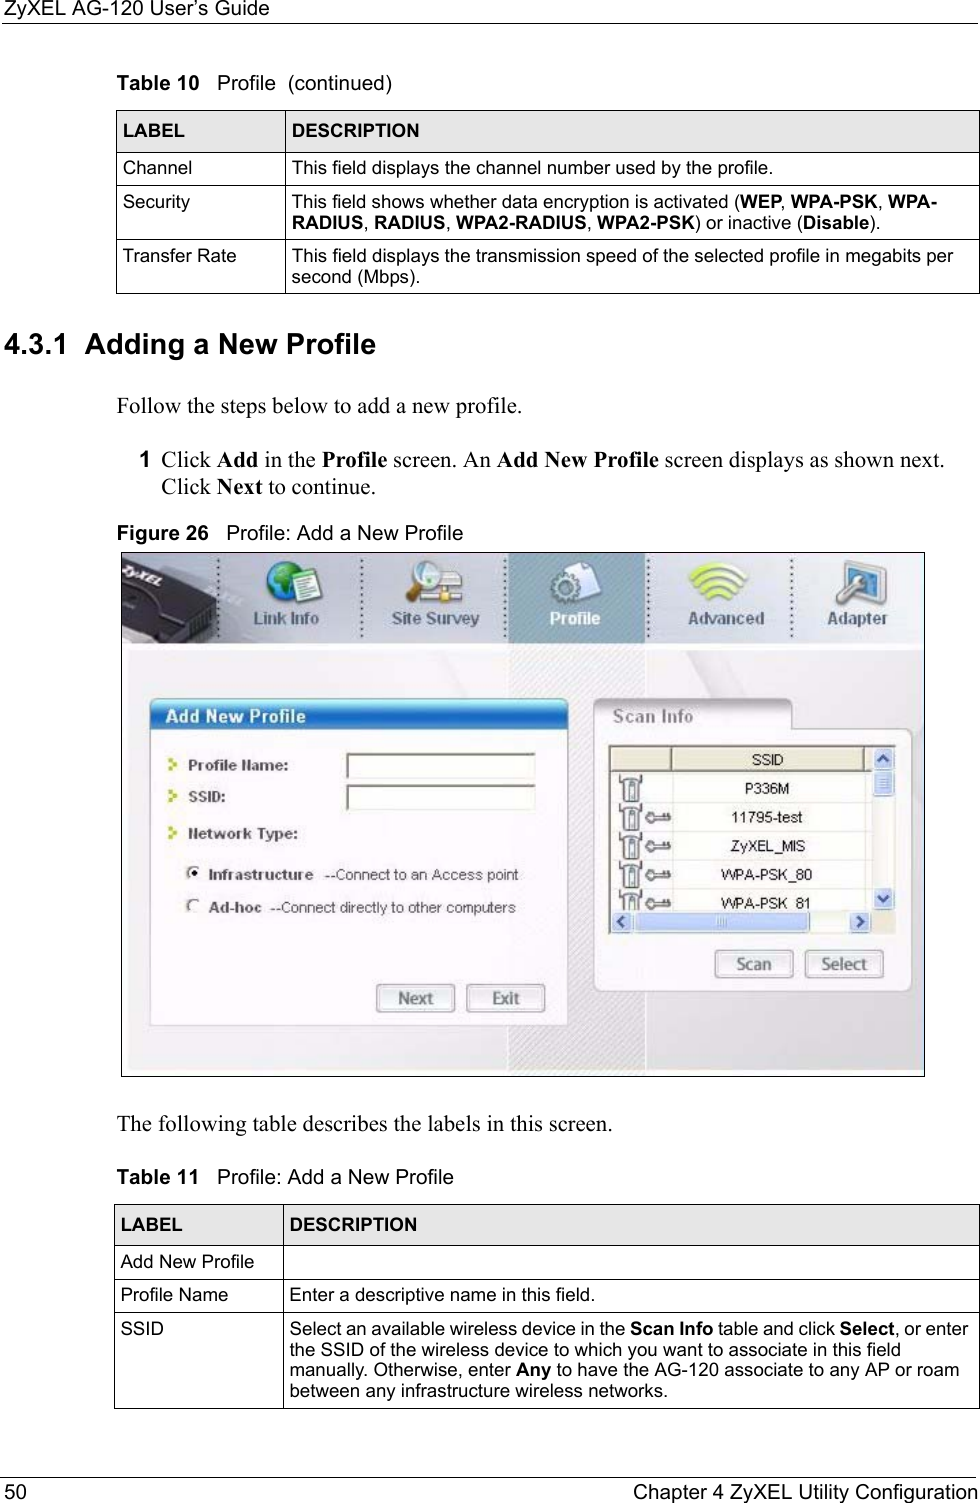 ZyXEL AG-120 User’s Guide50 Chapter 4 ZyXEL Utility Configuration4.3.1  Adding a New ProfileFollow the steps below to add a new profile.1Click Add in the Profile screen. An Add New Profile screen displays as shown next. Click Next to continue.Figure 26   Profile: Add a New Profile The following table describes the labels in this screen. Channel This field displays the channel number used by the profile.Security This field shows whether data encryption is activated (WEP, WPA-PSK, WPA-RADIUS, RADIUS, WPA2-RADIUS, WPA2-PSK) or inactive (Disable).Transfer Rate This field displays the transmission speed of the selected profile in megabits per second (Mbps).Table 10   Profile  (continued)LABEL DESCRIPTIONTable 11   Profile: Add a New Profile LABEL DESCRIPTIONAdd New ProfileProfile Name Enter a descriptive name in this field.SSID Select an available wireless device in the Scan Info table and click Select, or enter the SSID of the wireless device to which you want to associate in this field manually. Otherwise, enter Any to have the AG-120 associate to any AP or roam between any infrastructure wireless networks.